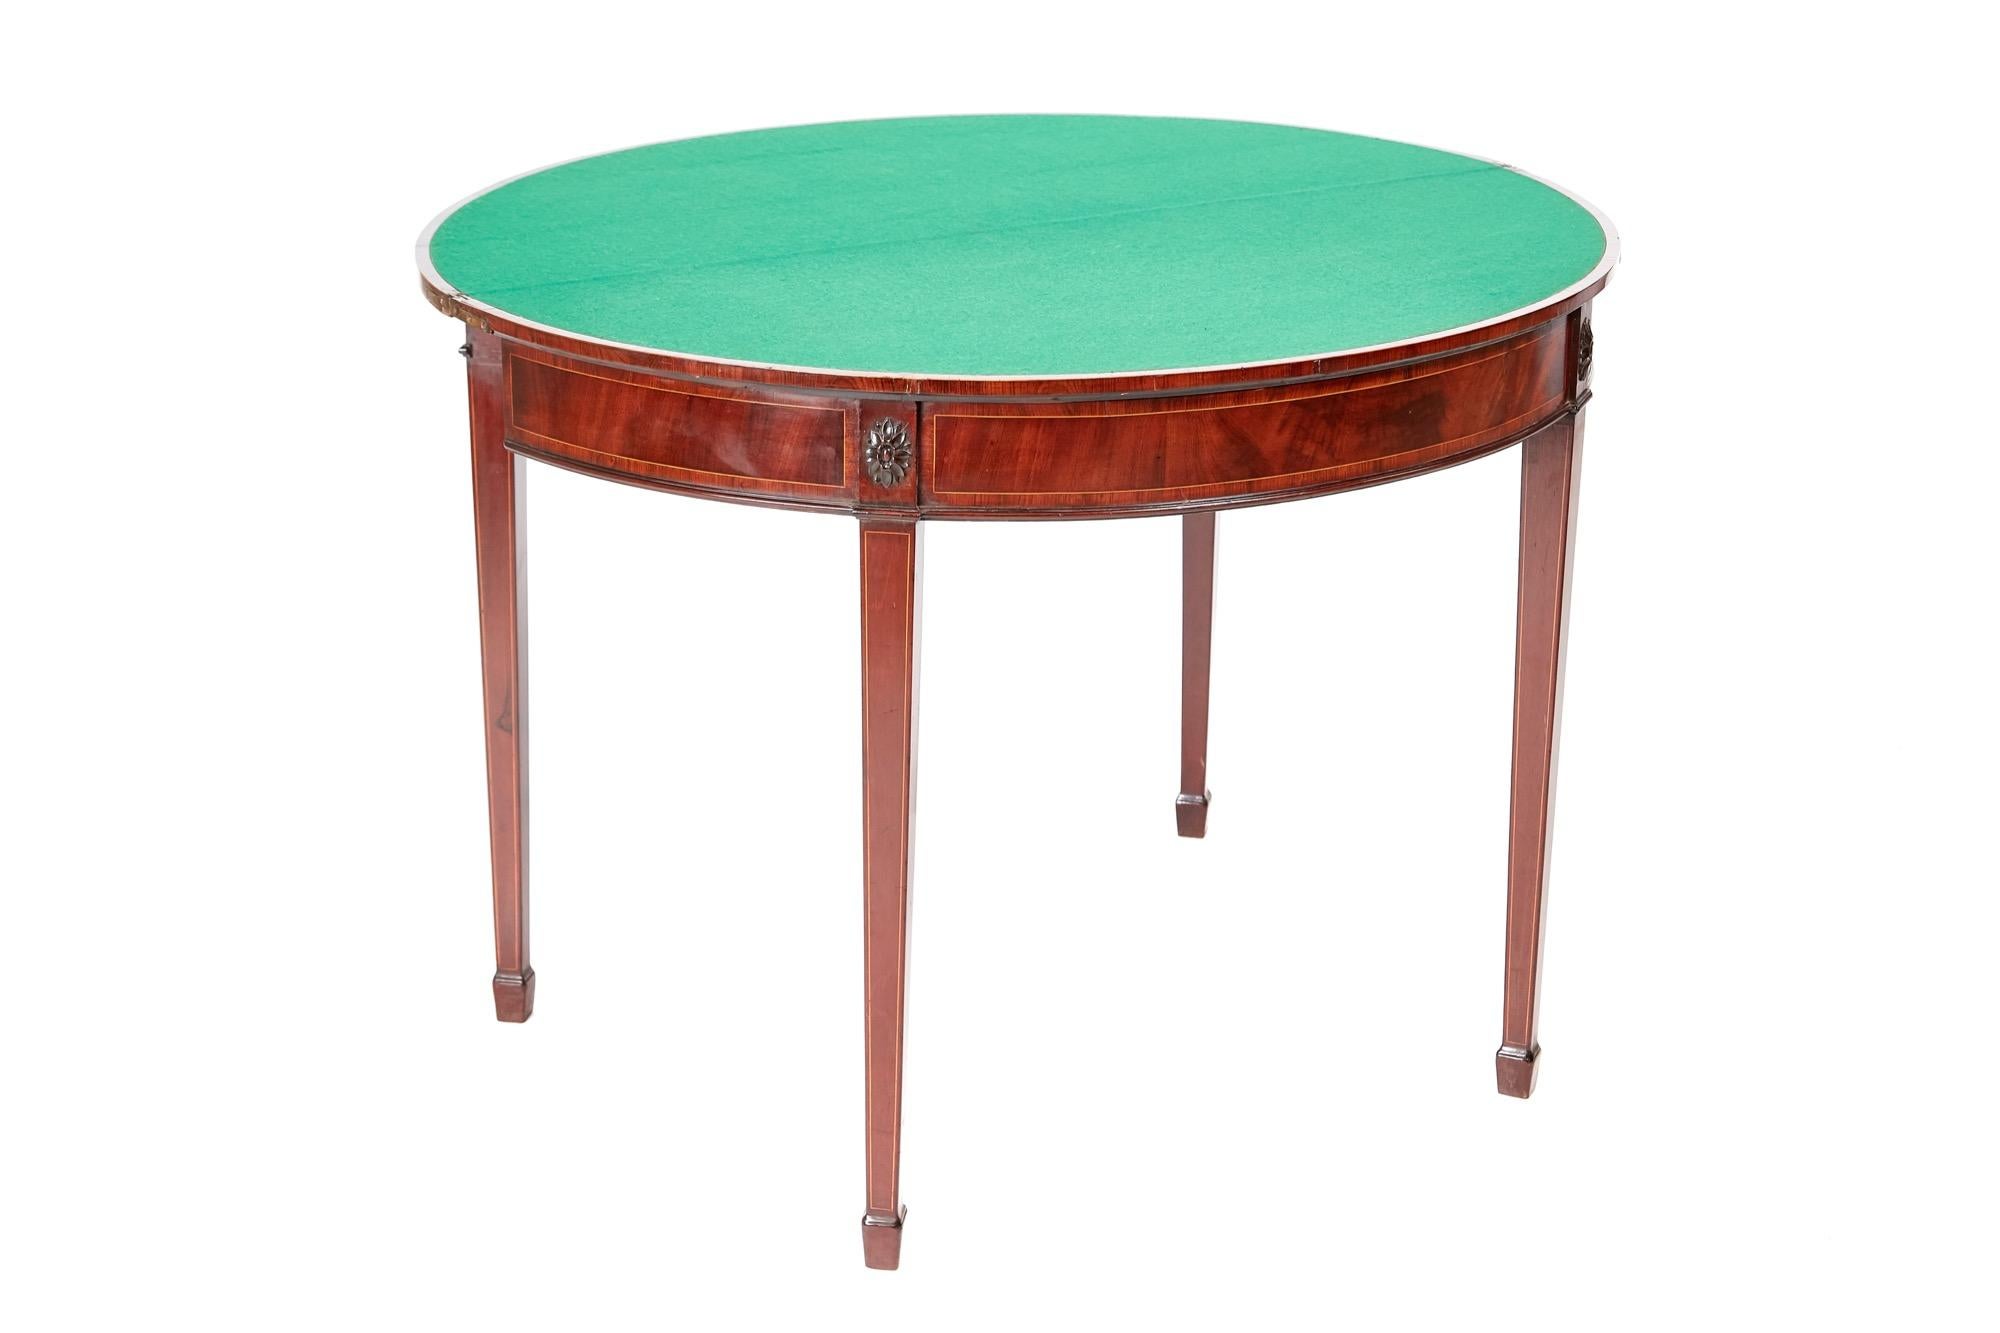 A splendid George III antique mahogany demilune card table. A very attractive piece which would grace any home. It has a delightful mahogany top crossbanded in satinwood, green baize interior, mahogany frieze crossbanded in satinwood, standing on